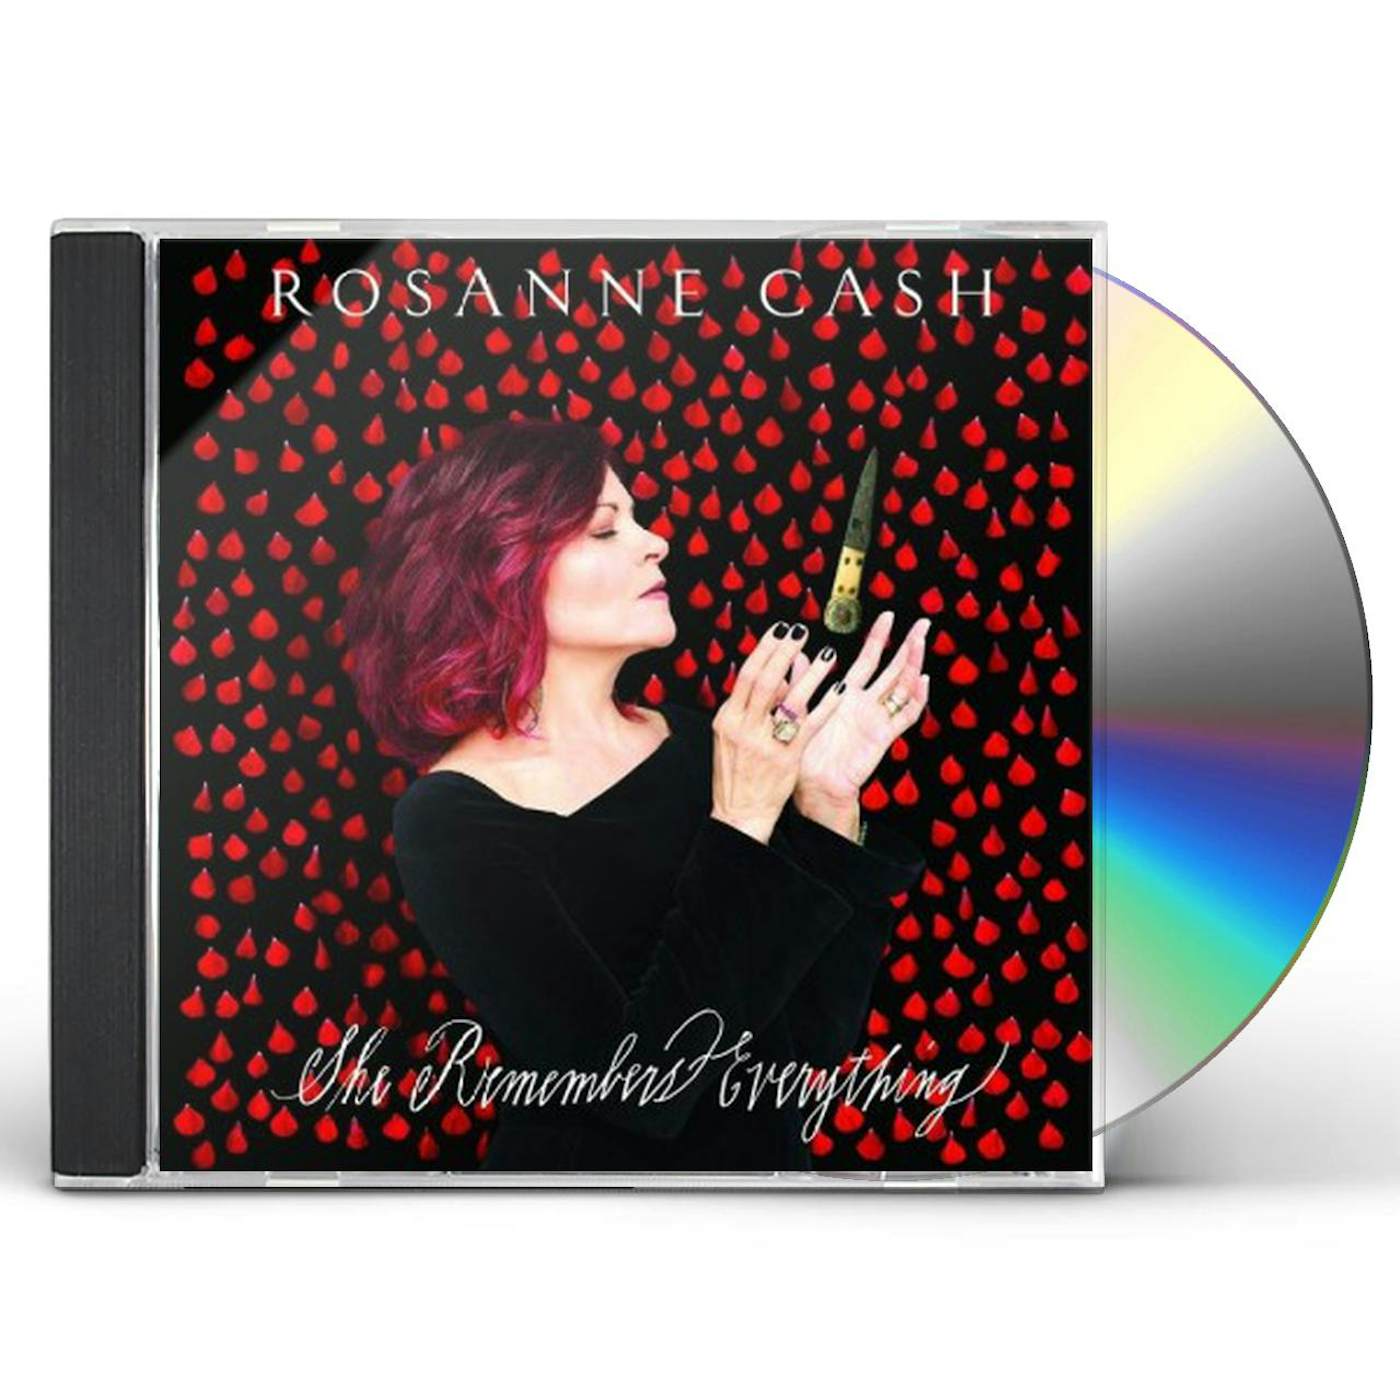 Rosanne Cash SHE REMEMBERS EVERYTHING CD